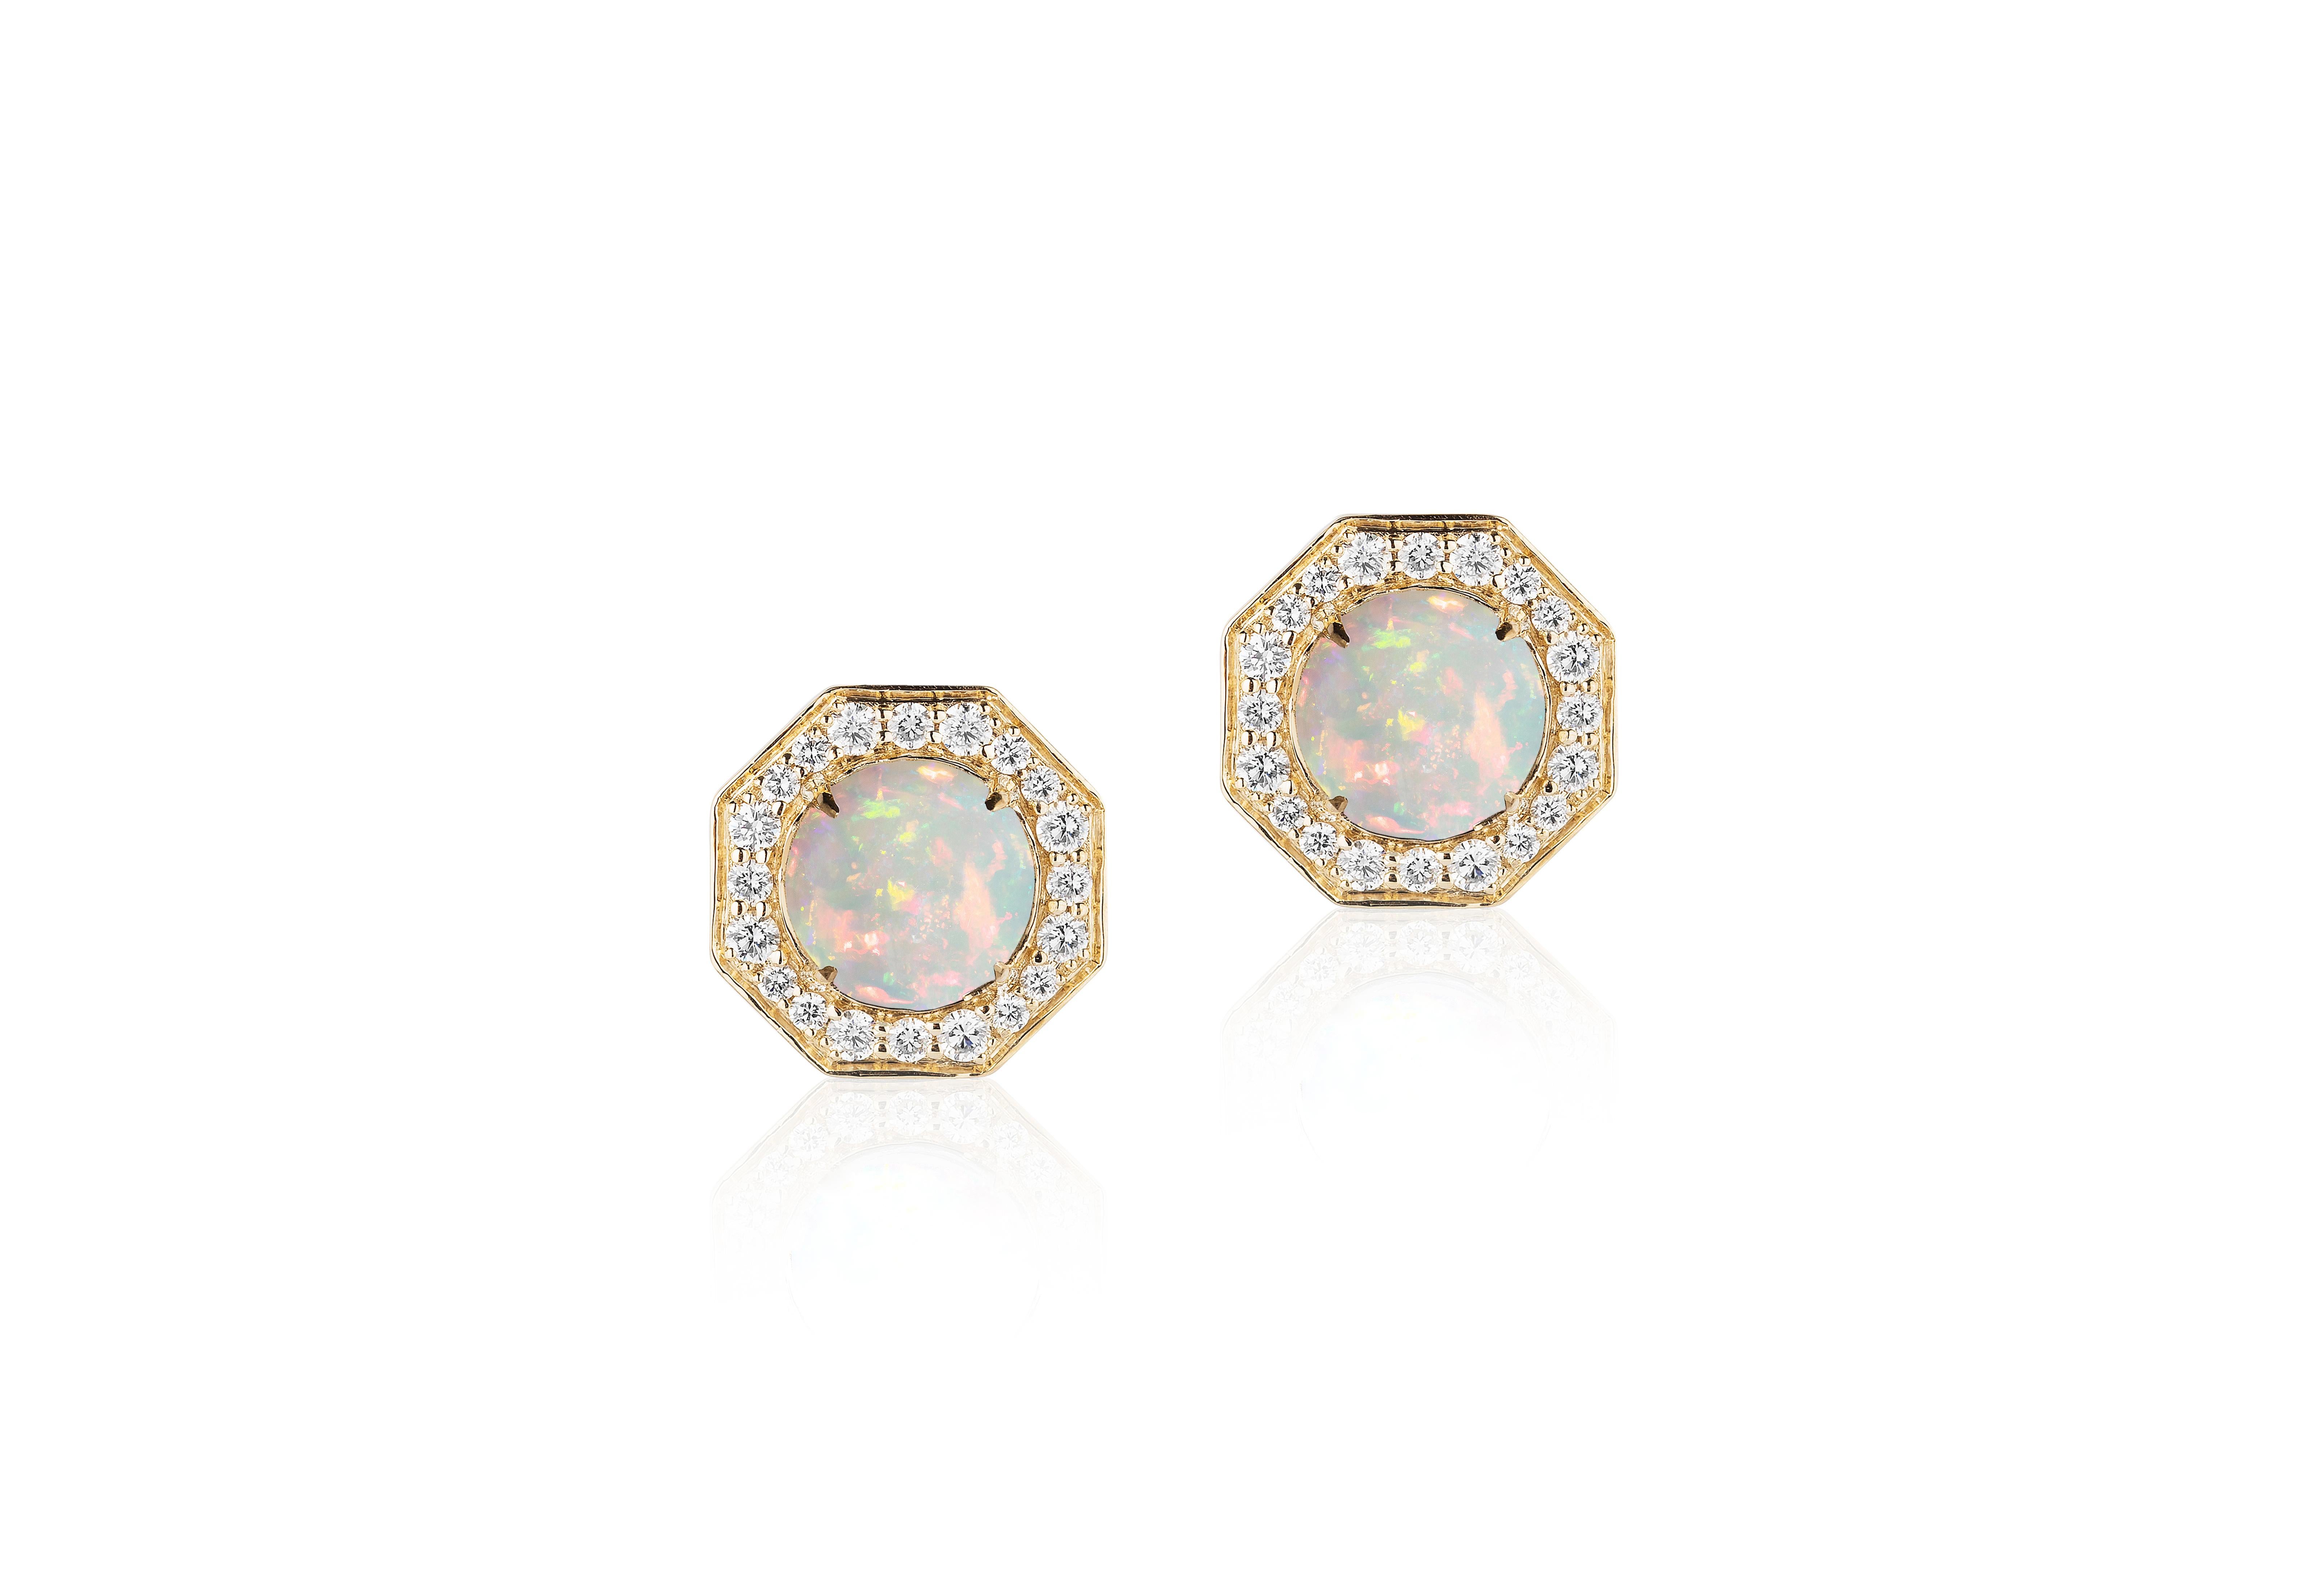 Opal Cab Small Pendant with Diamonds in 18K Yellow Gold, from 'Rock N Roll' Collection

Stone Size: 8 mm

Gemstone Weight: Opal- 1.29 Carats

Diamond: G-H / VS, Approx Wt: 0.36 Carats

Opal Stud Earrings with Diamonds in 18k Yellow Gold, from 'Rock